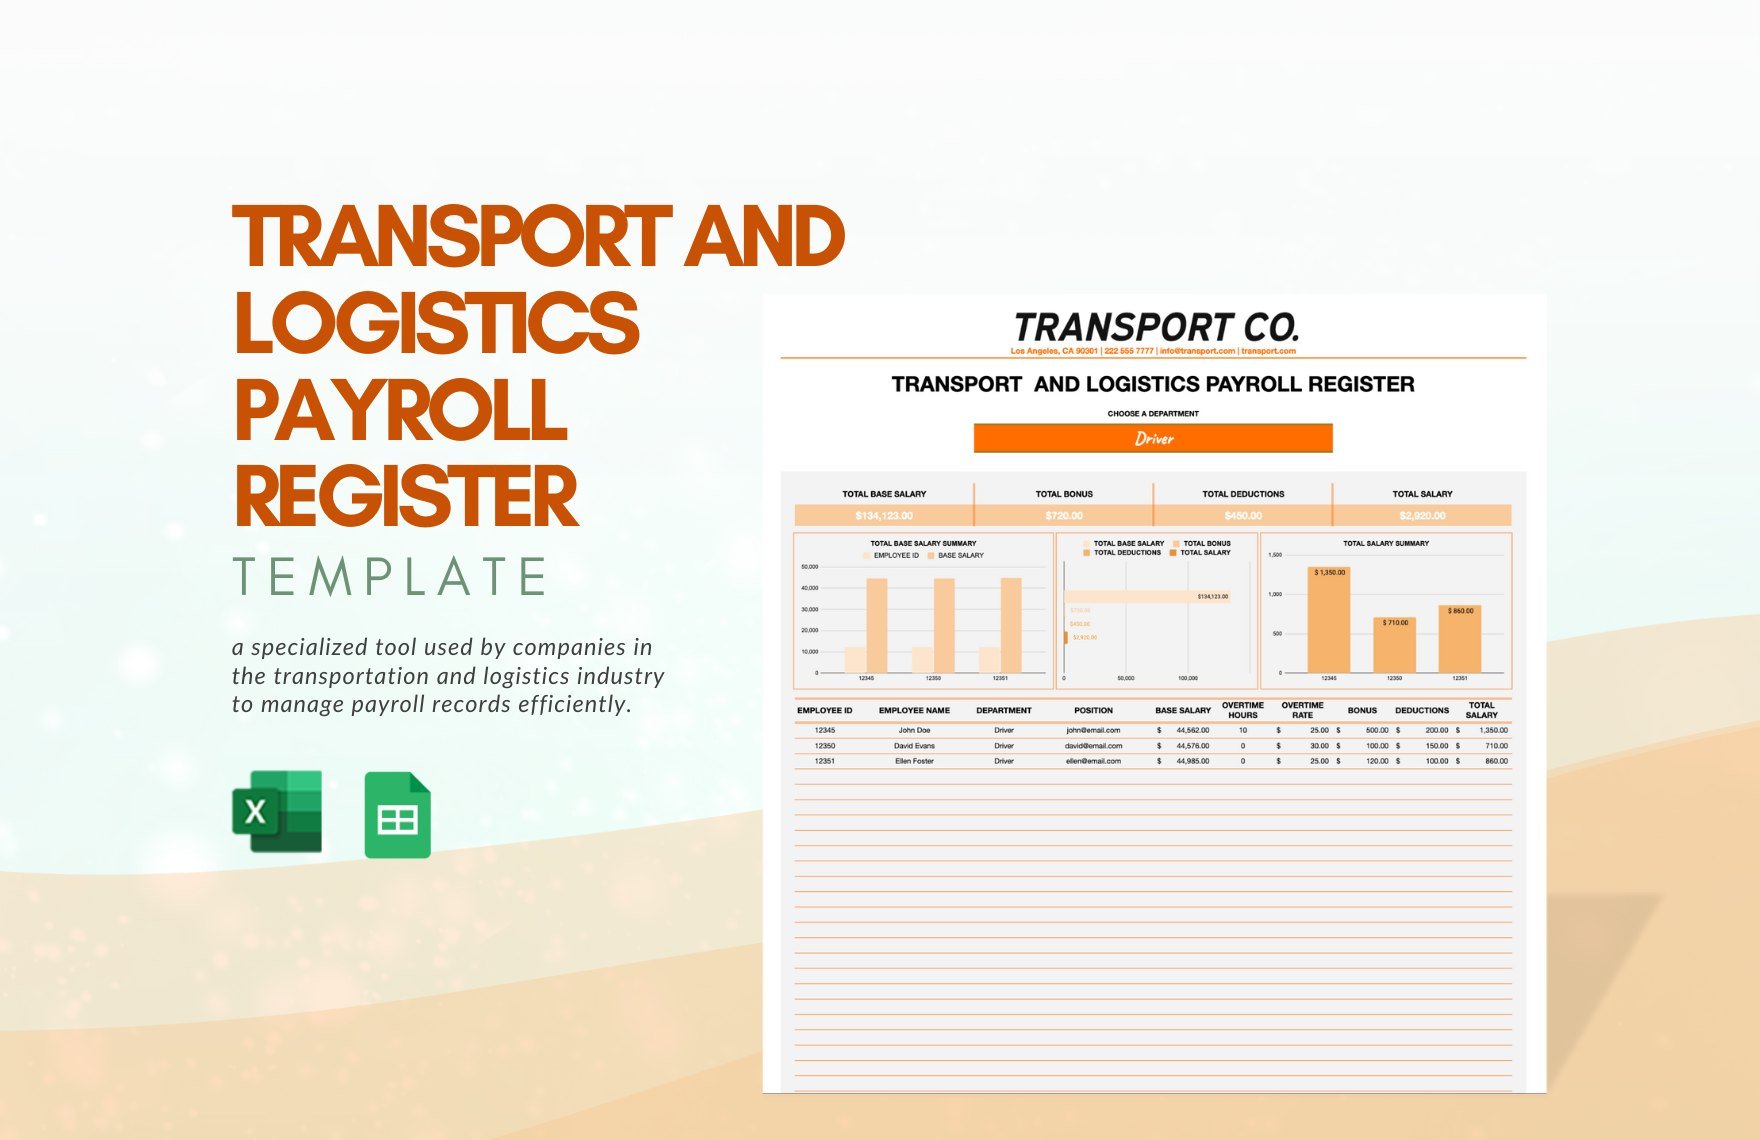 Transport and Logistics Payroll Register Template in Excel, Google Sheets